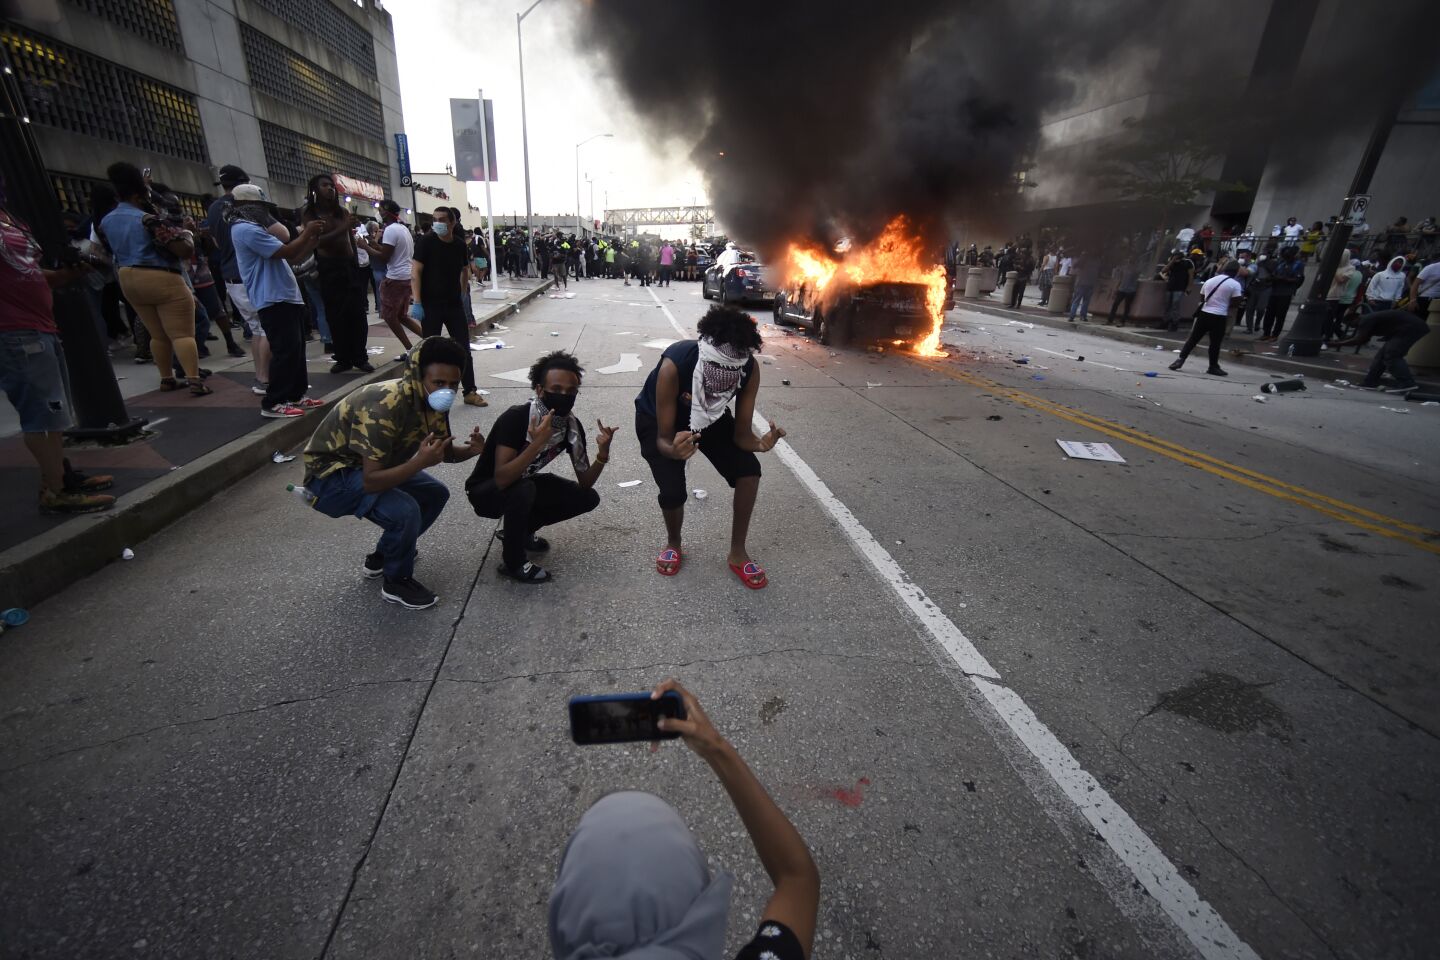 An Atlanta Police Department vehicle burns in a protest Friday.